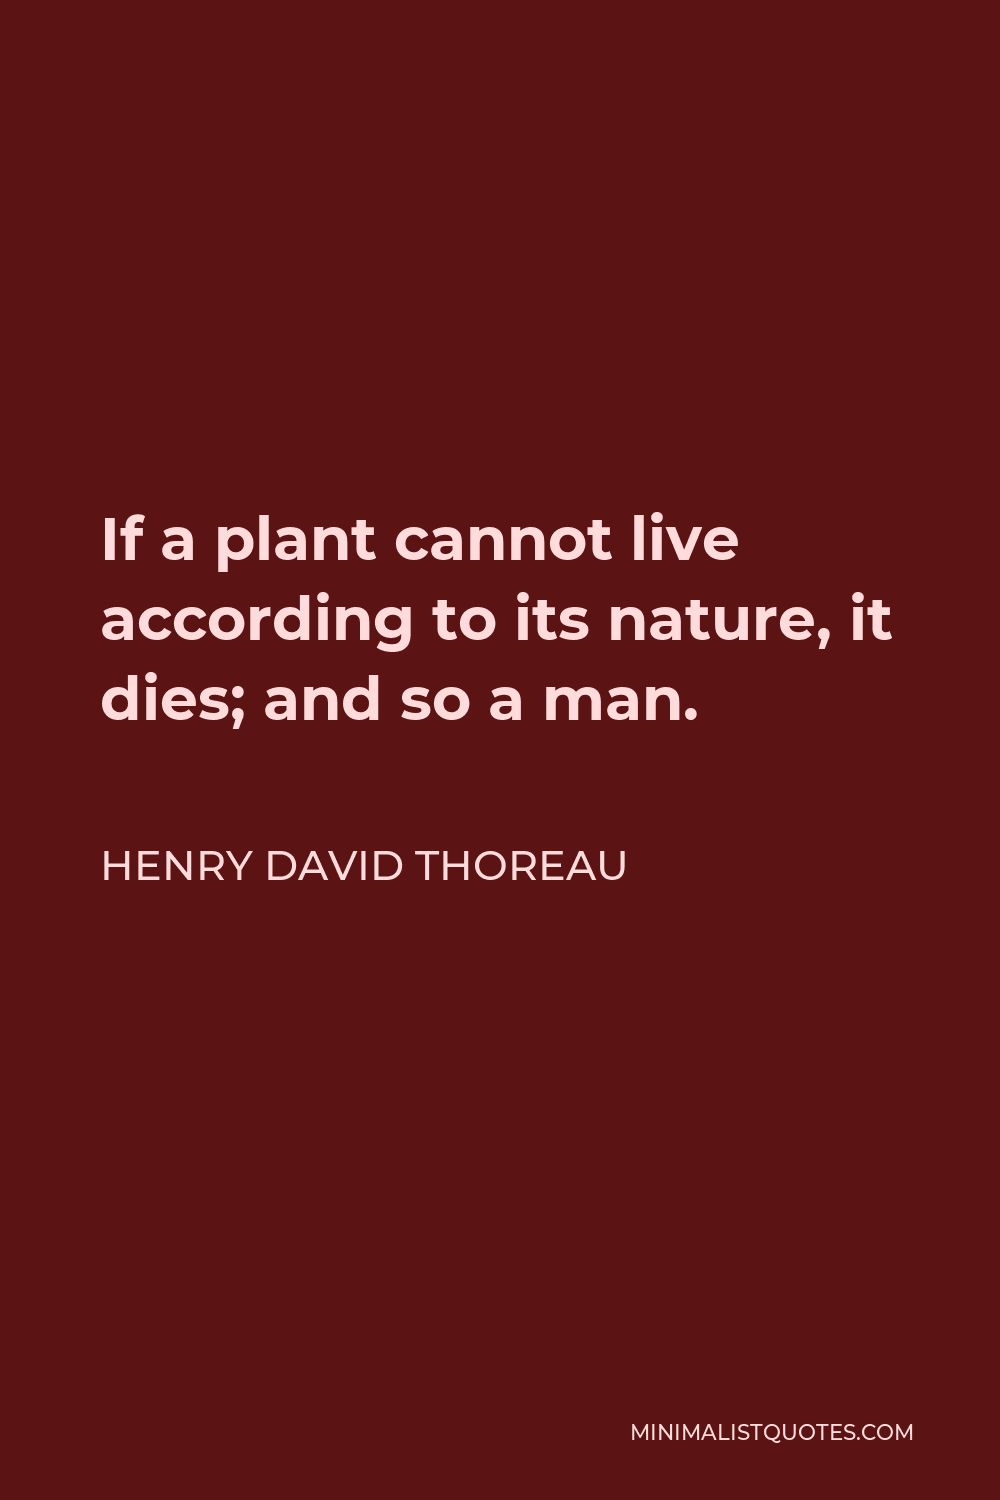 Henry David Thoreau Quote - If a plant cannot live according to its nature, it dies; and so a man.